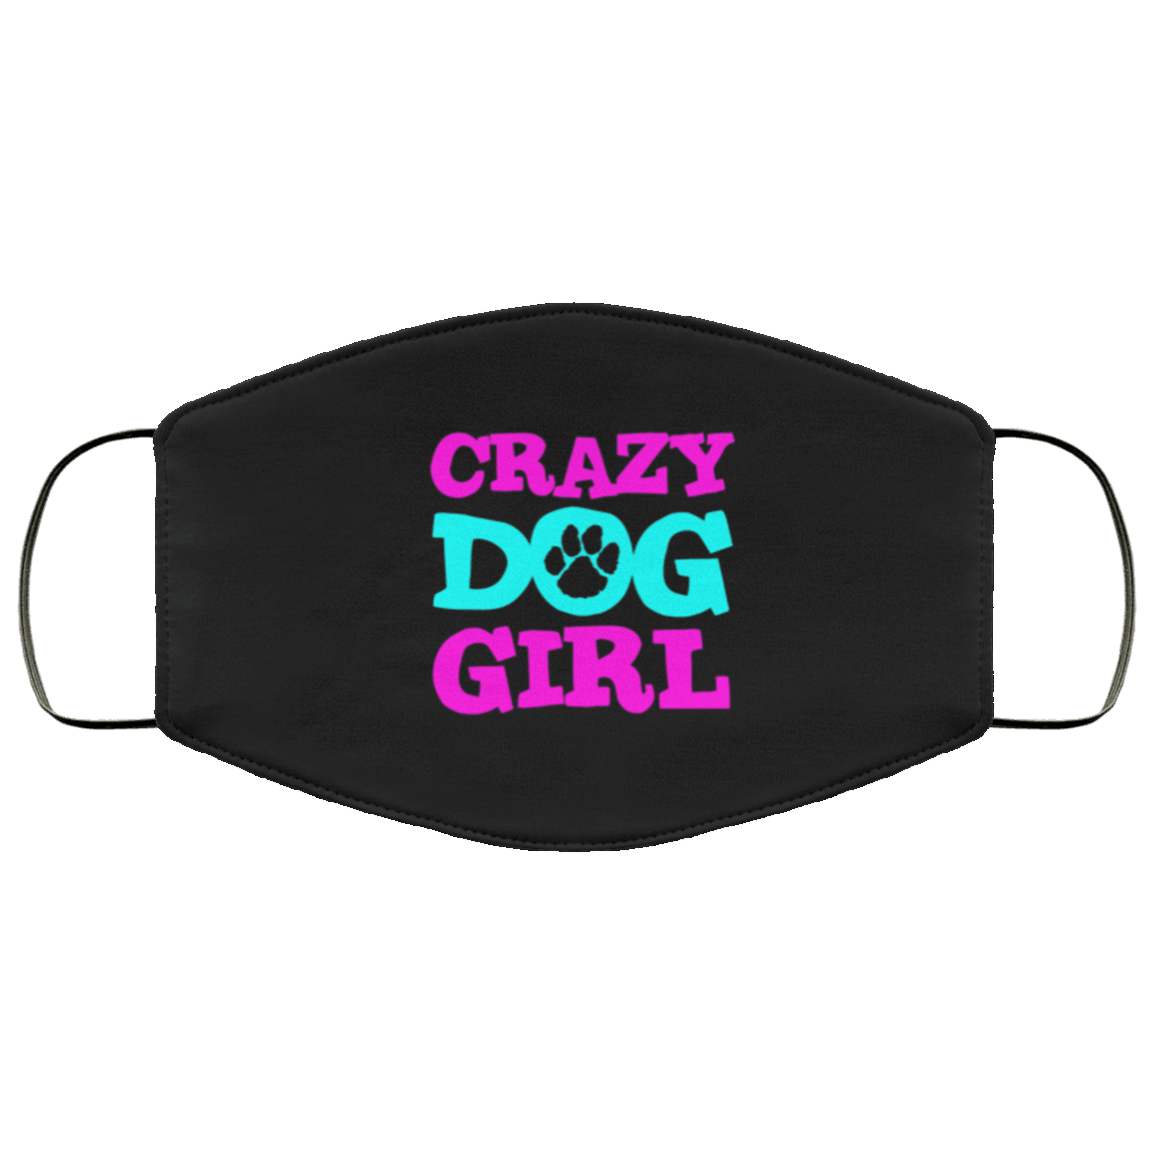 Designs by MyUtopia Shout Out:Crazy Dog Girl Humor Adult Fabric Face Mask with Elastic Ear Loops,3 Layer Fabric Face Mask / Black / Adult,Fabric Face Mask